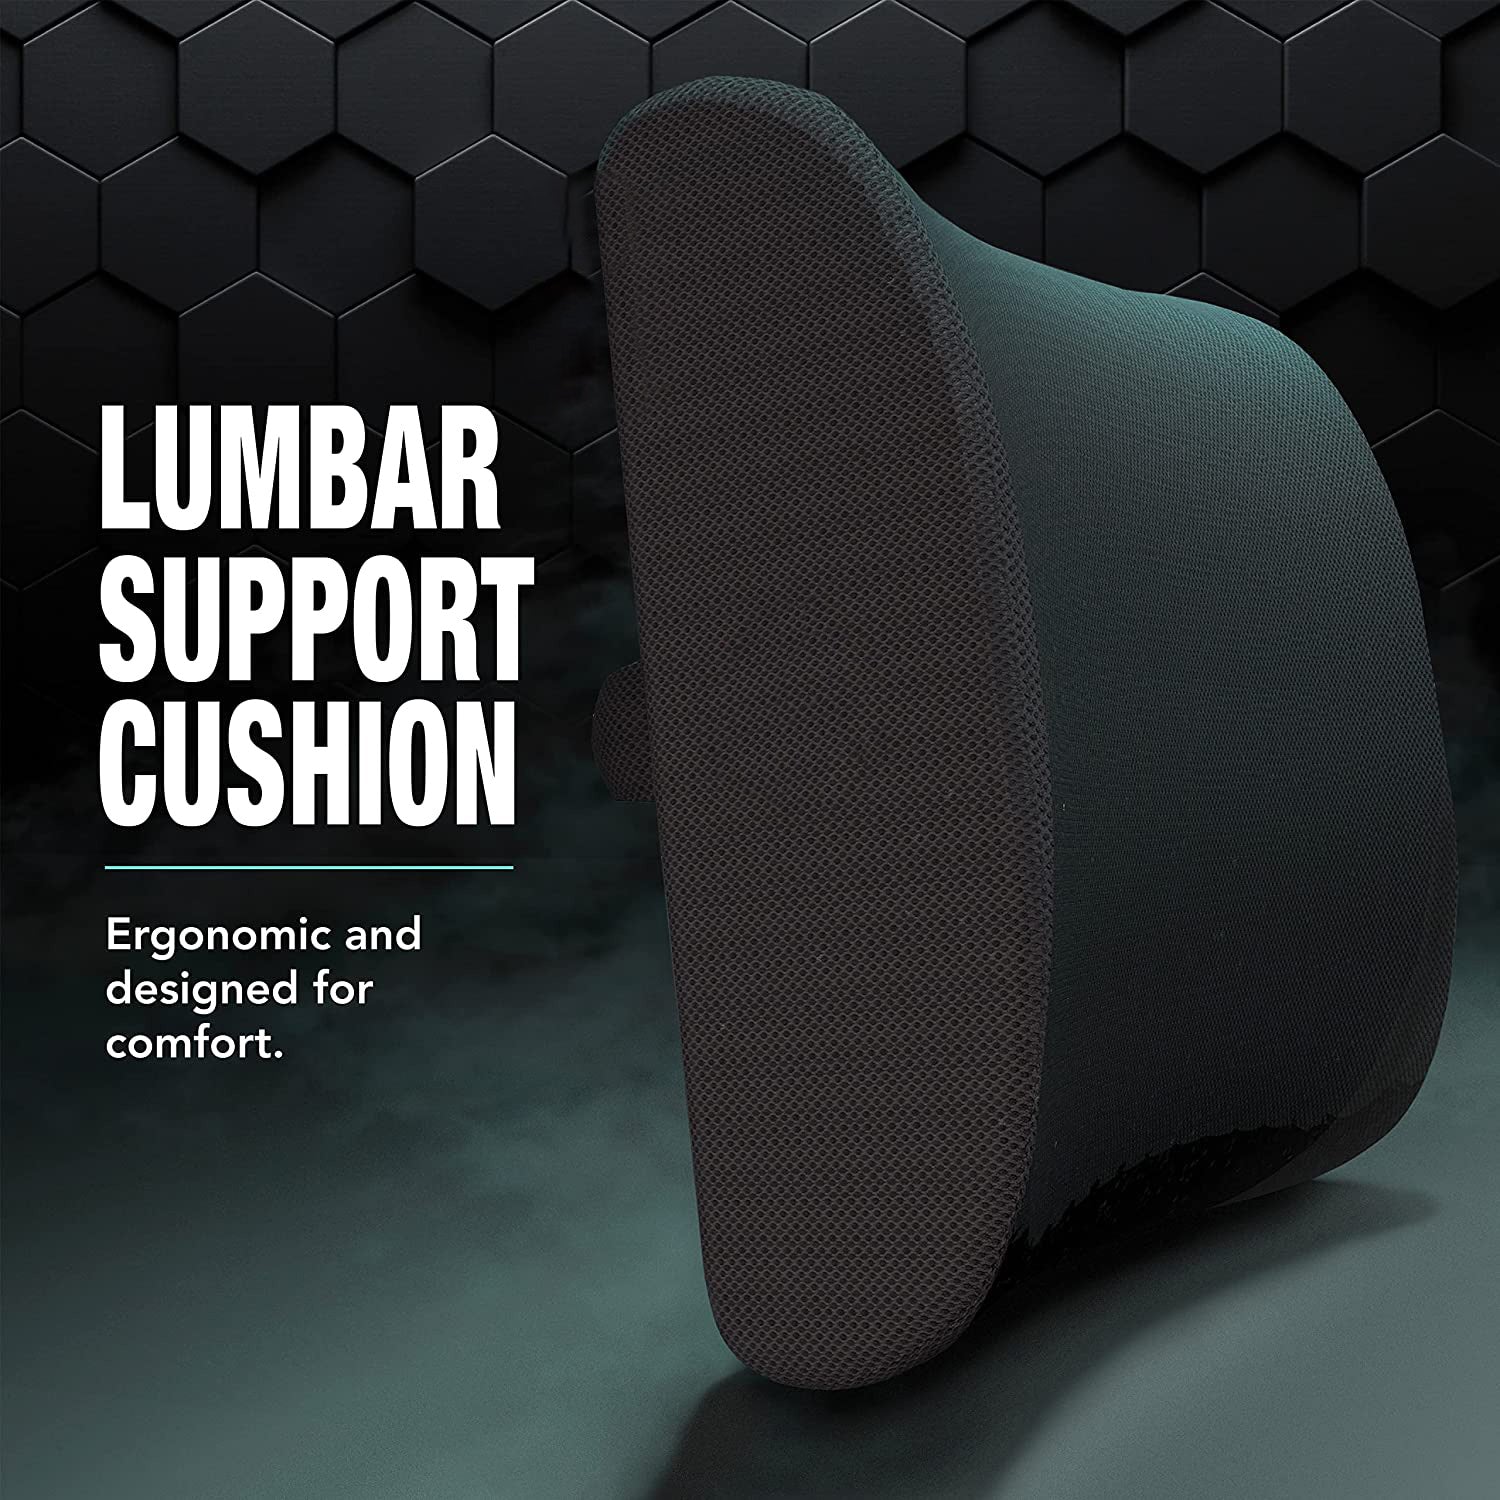 Posture Perfect Memory Foam Relief Chair Pillow